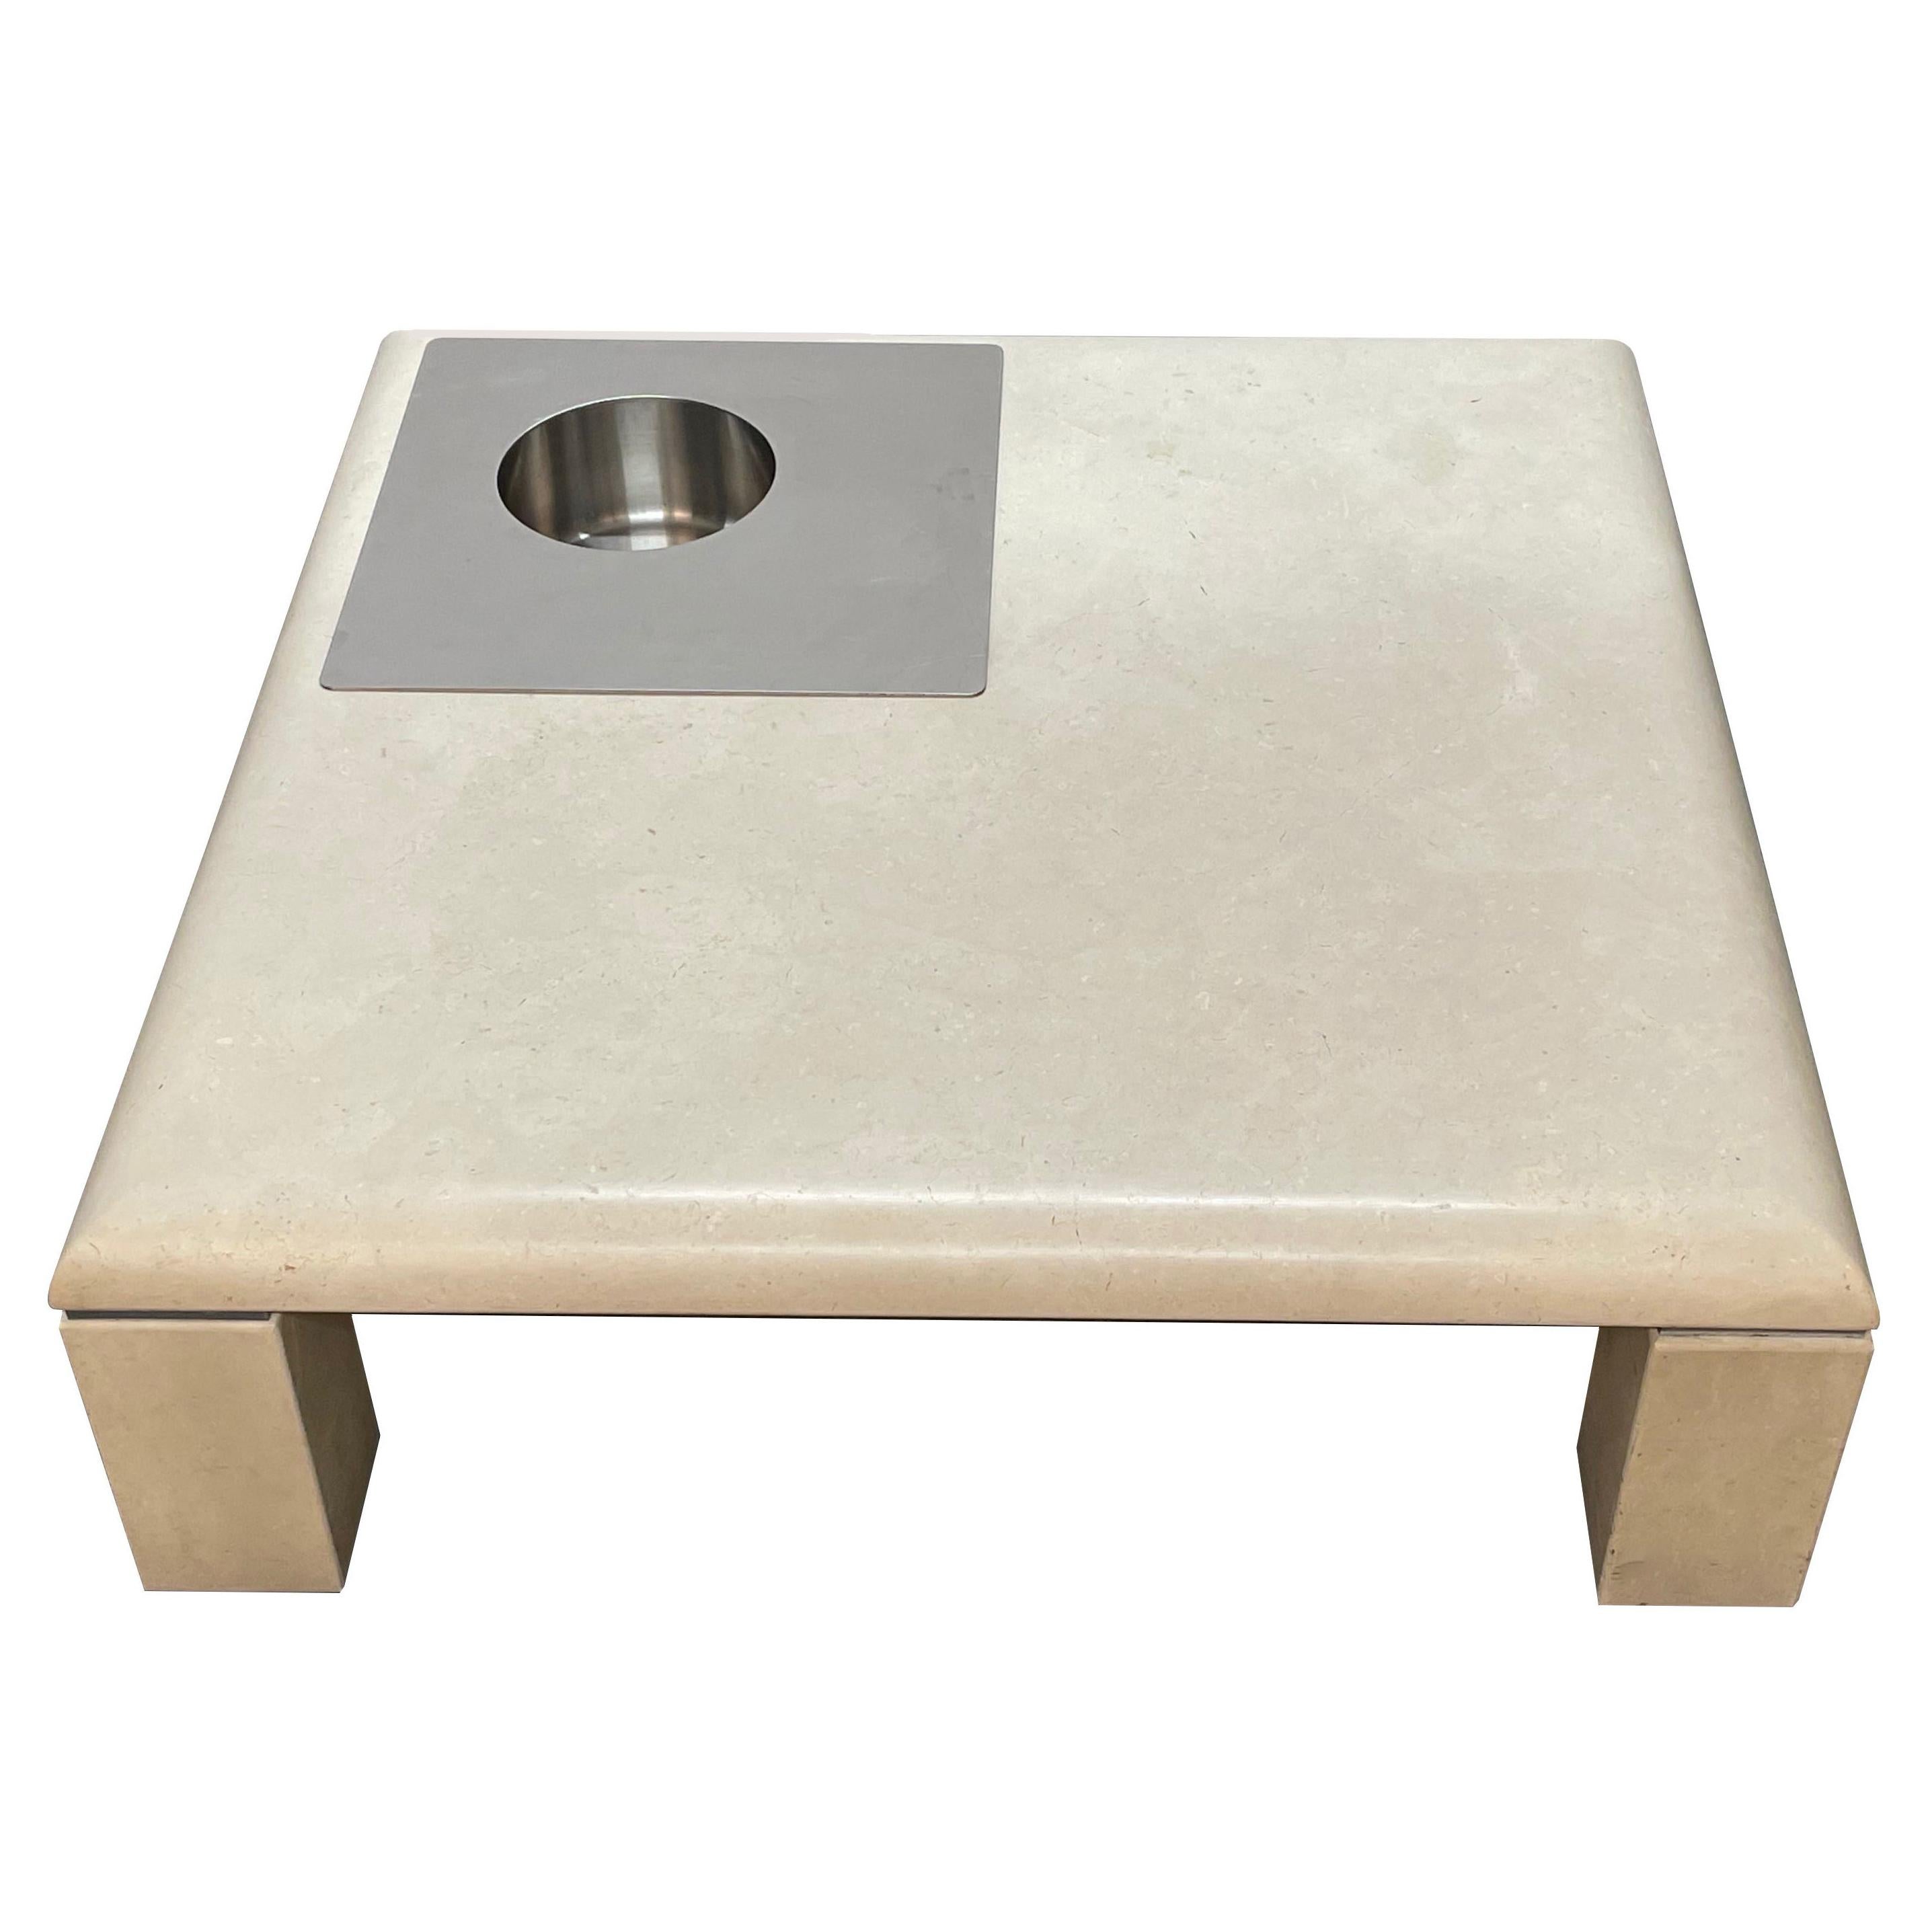 Willy Rizzo Botticino White Marble and Steel Square Italian Coffee Table, 1970s